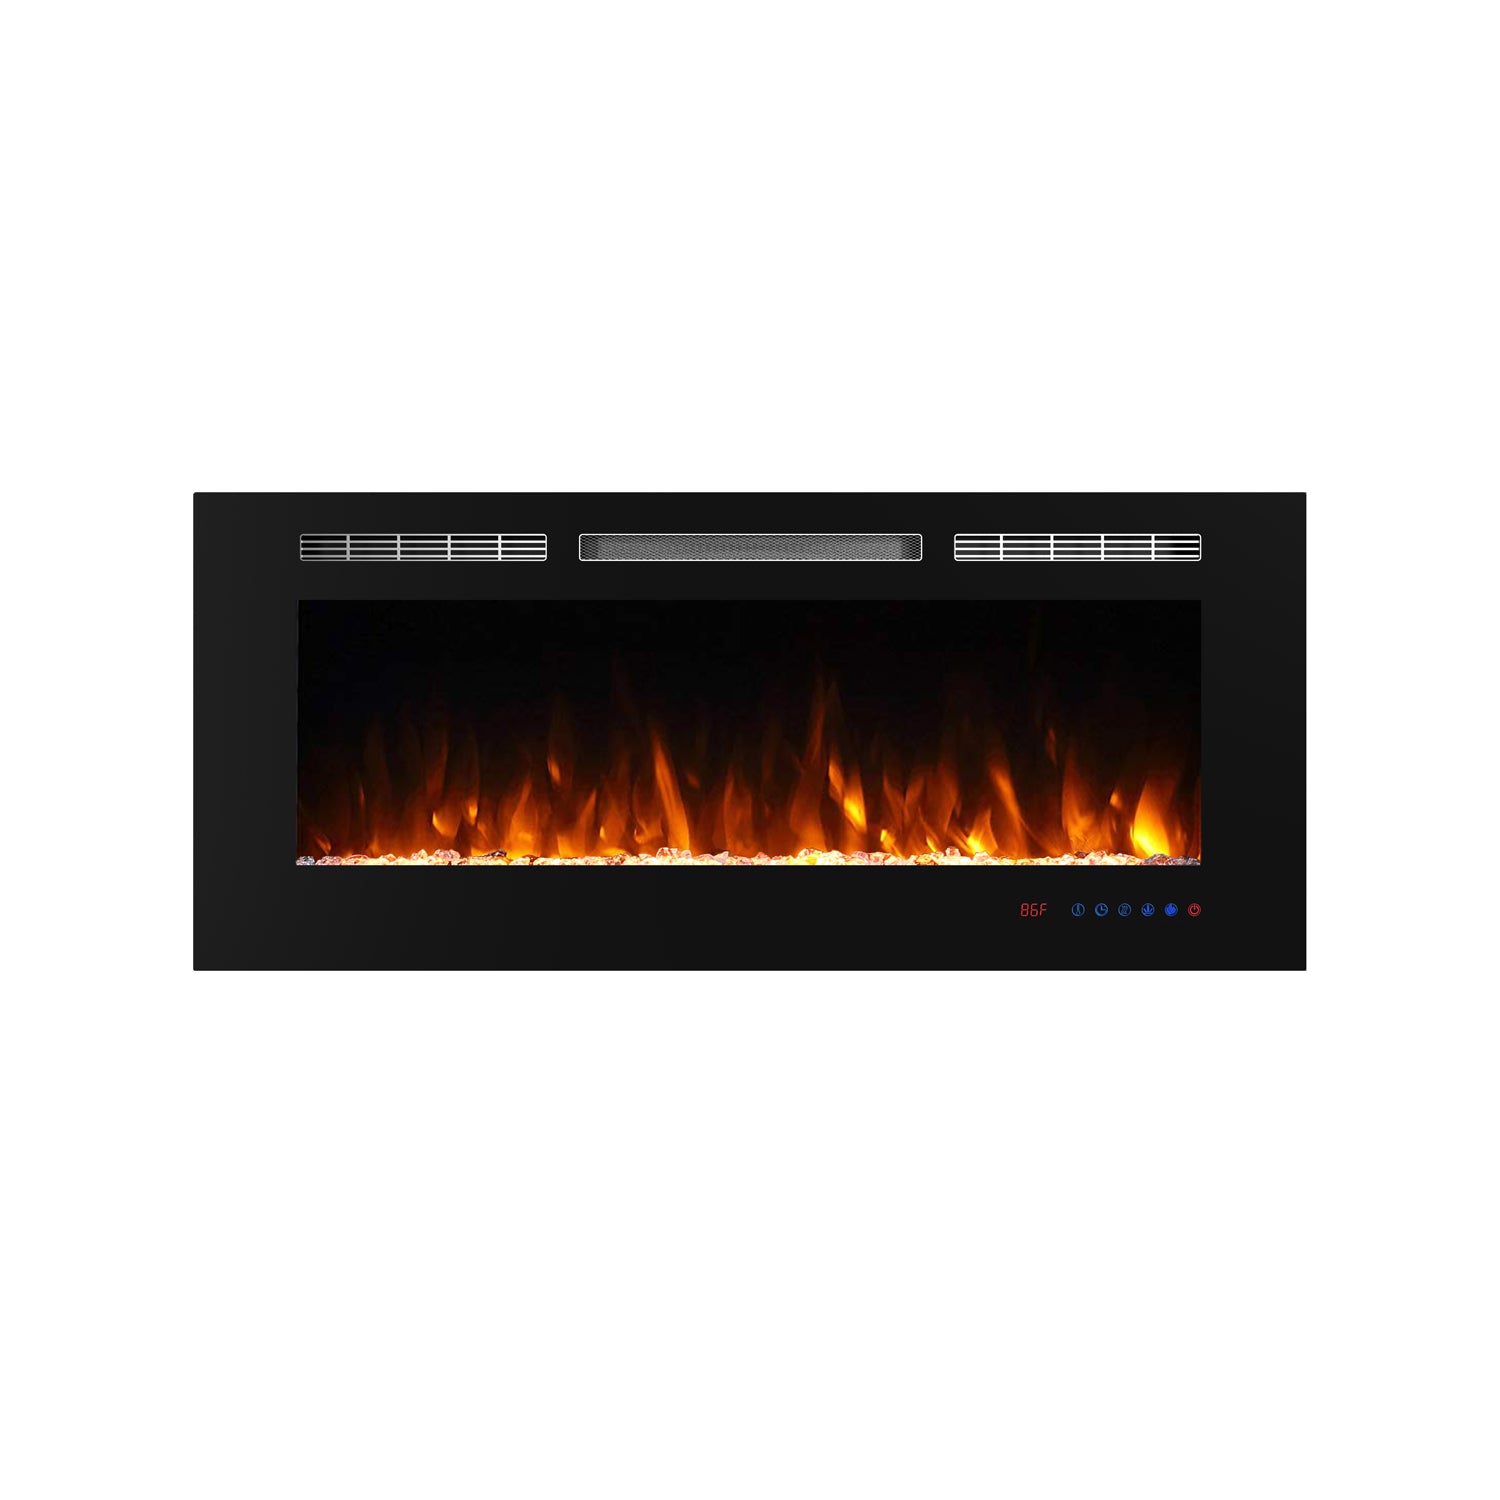 Recessed Electric Fireplace Insert with Remote Control, Touch Screen, 750/1500W, Black-Boyel Living